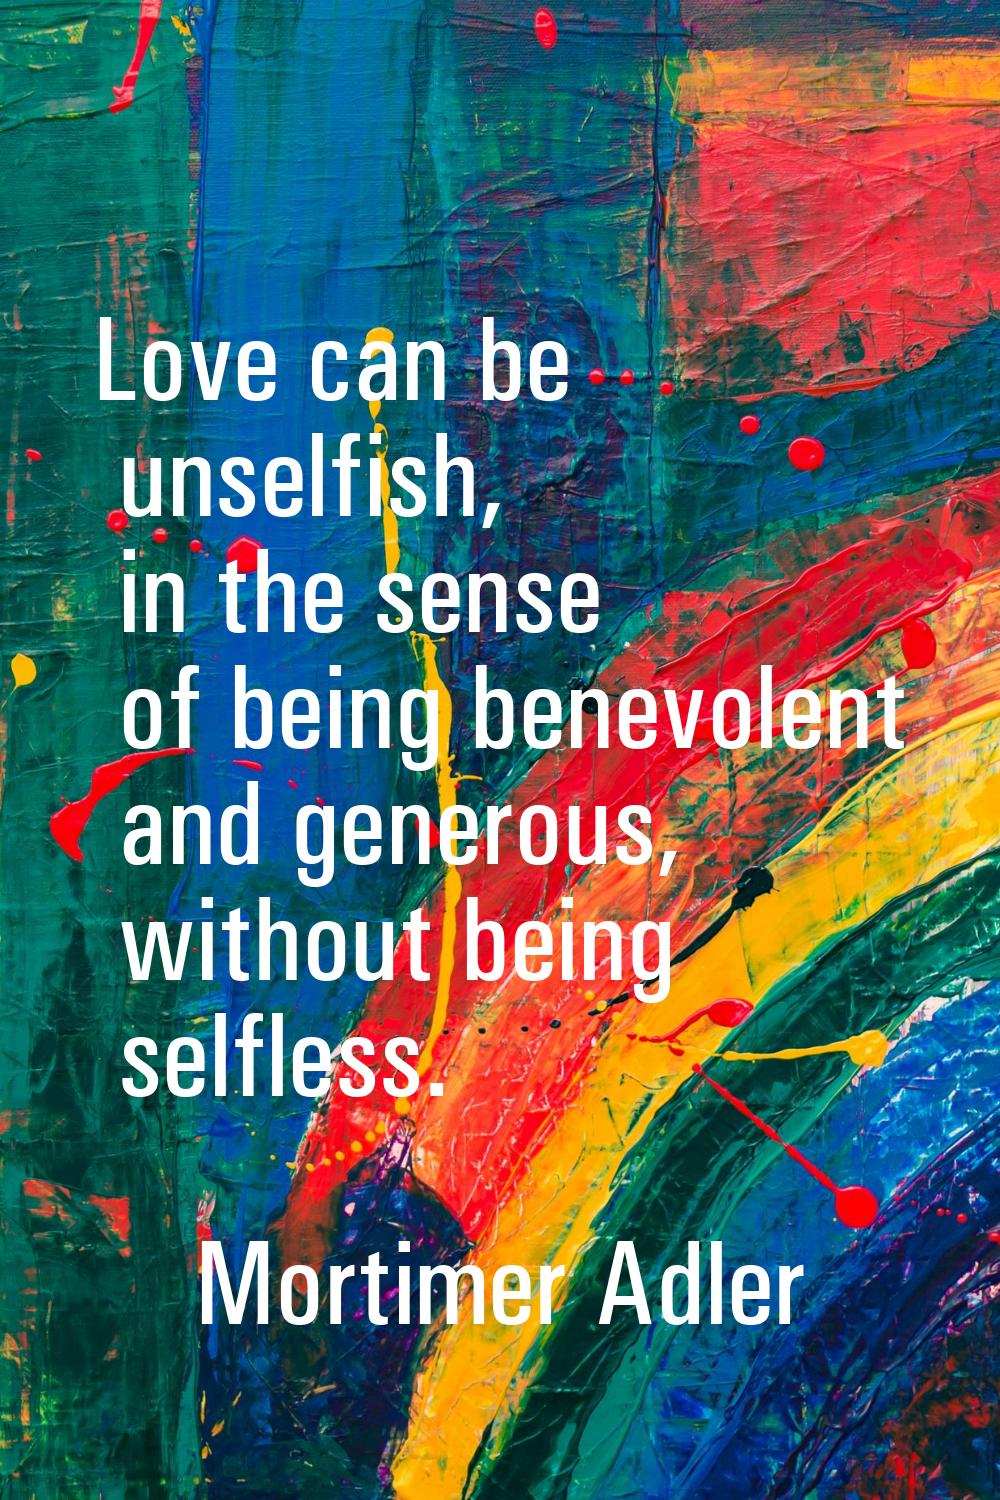 Love can be unselfish, in the sense of being benevolent and generous, without being selfless.